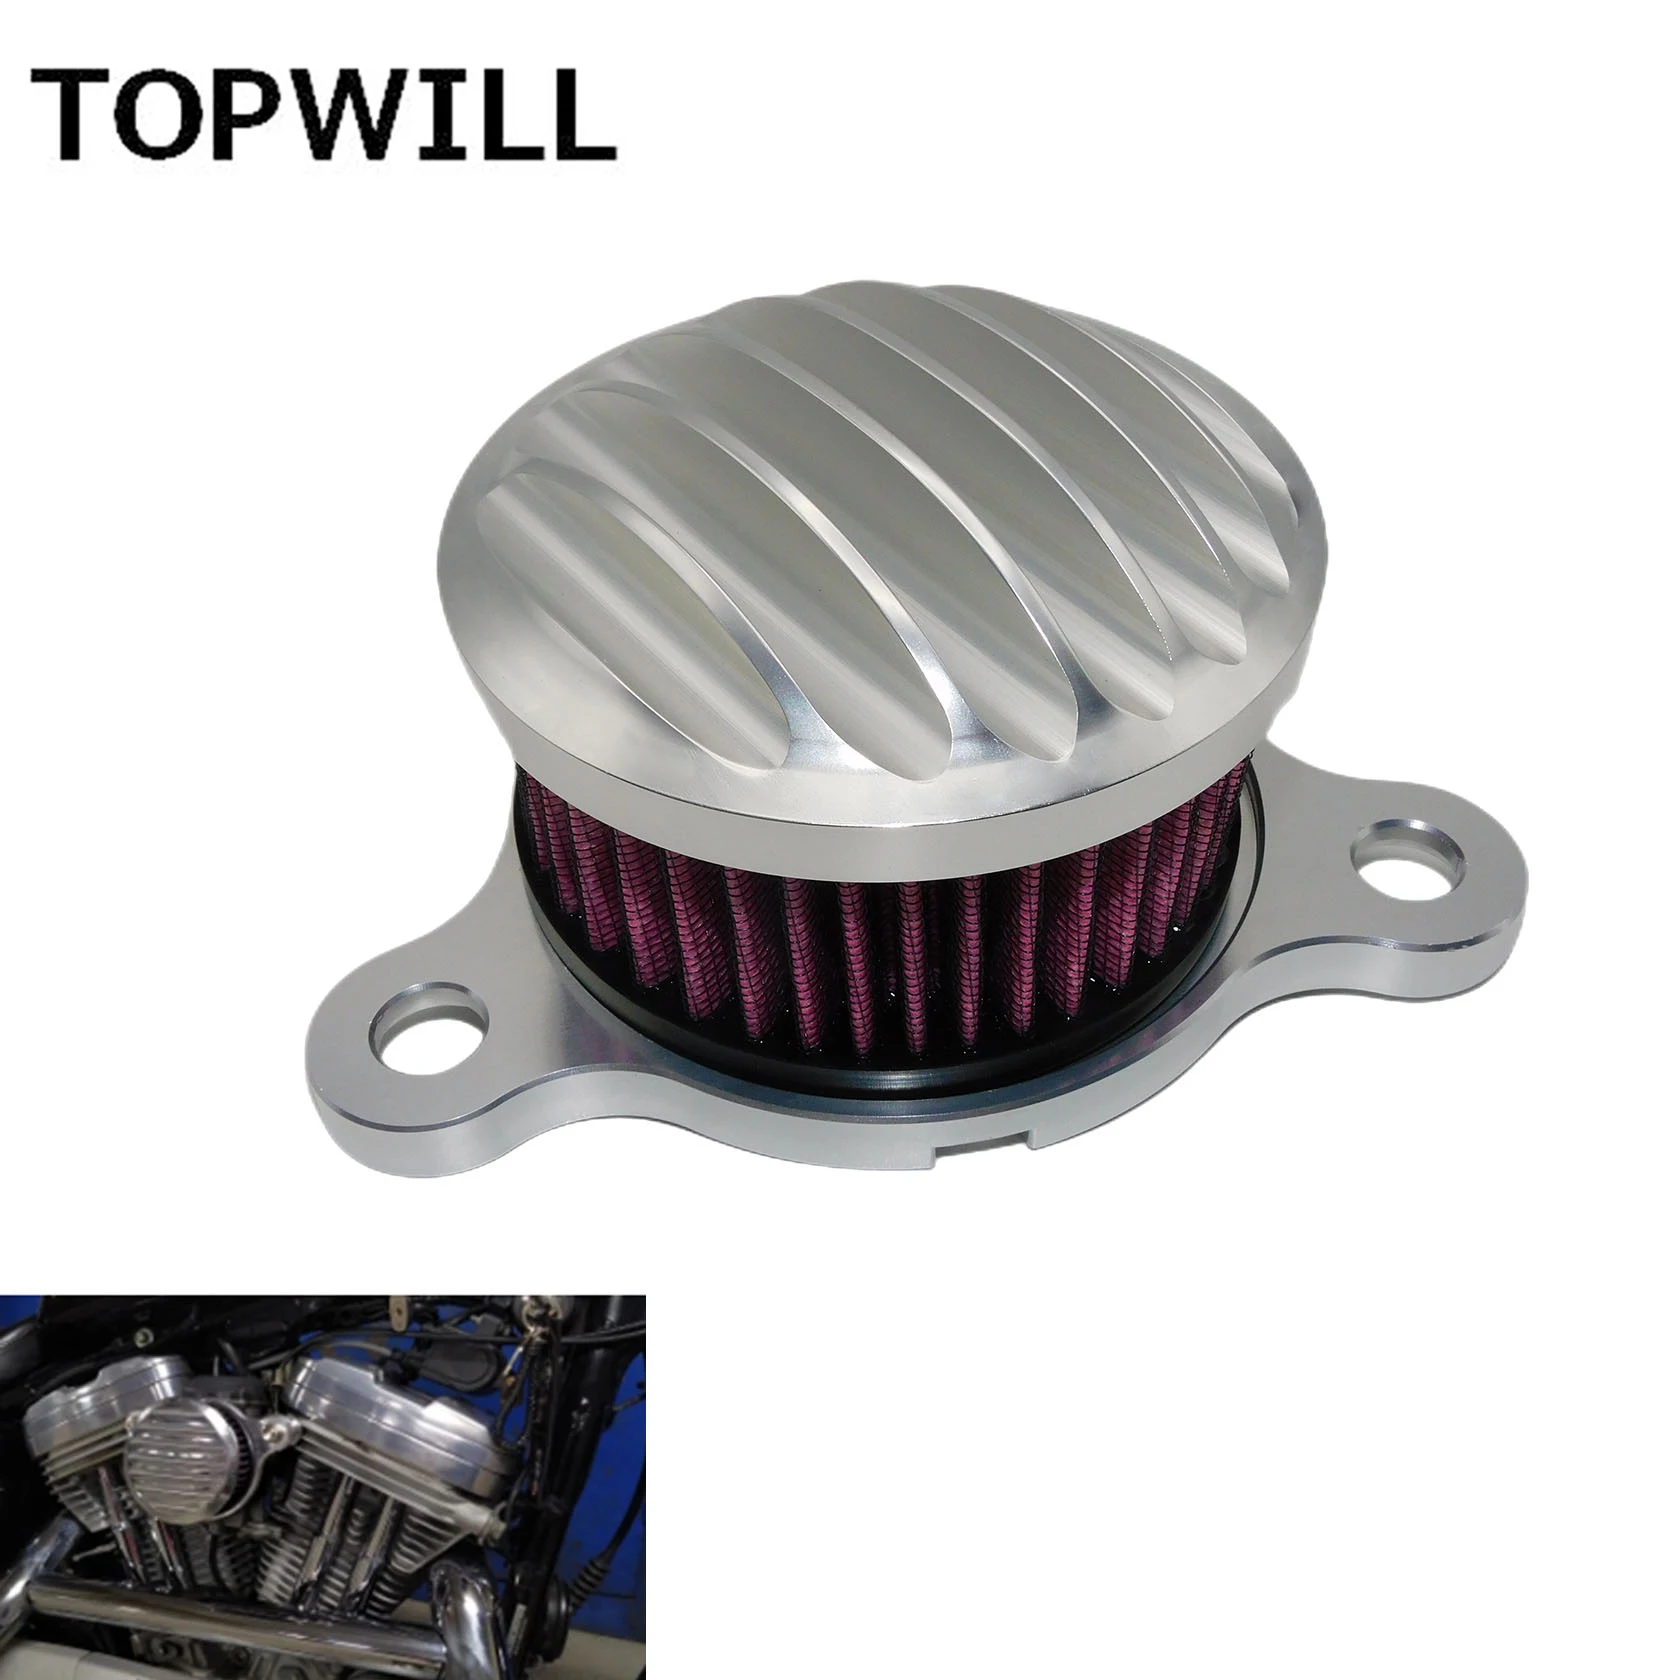 

Motorcycle Chrome Air Cleaner Intake Filter CNC Aluminum For Harley Sportster XL883 XL1200 48 Iron Roadster Custom 1991-2021